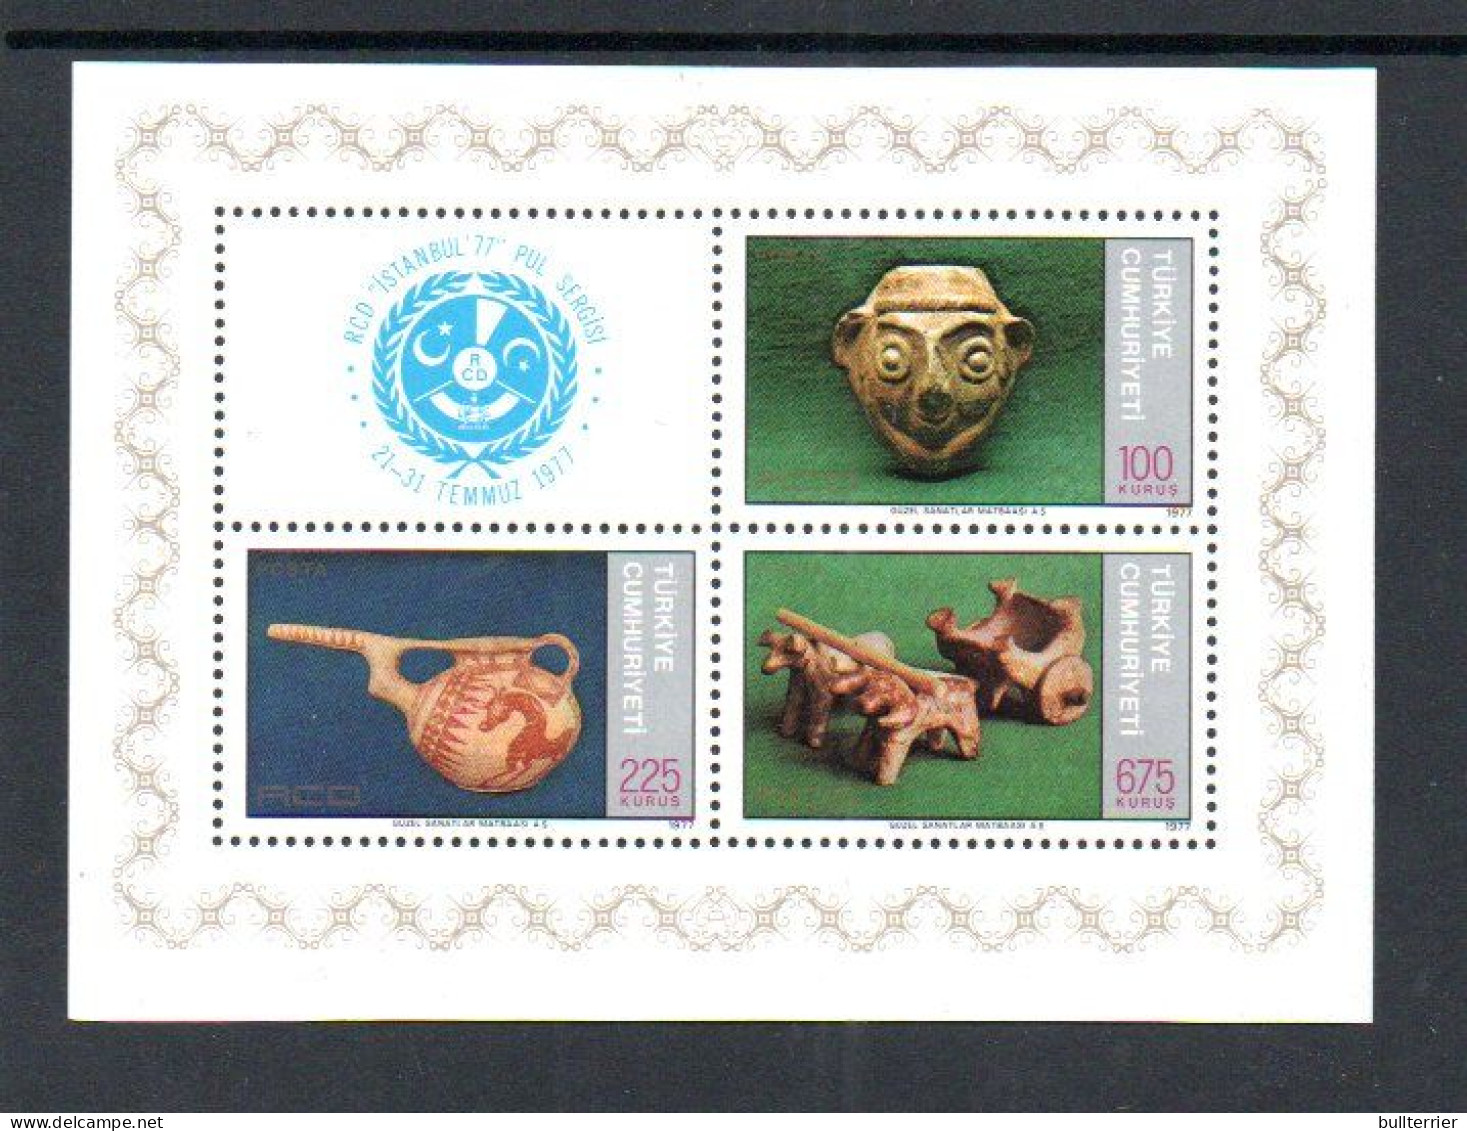 TURKEY - 1977 - RCD /POTTERY SOUVENIR SHEET MINT NEVER HINGED , SG CAT £15 - Unused Stamps